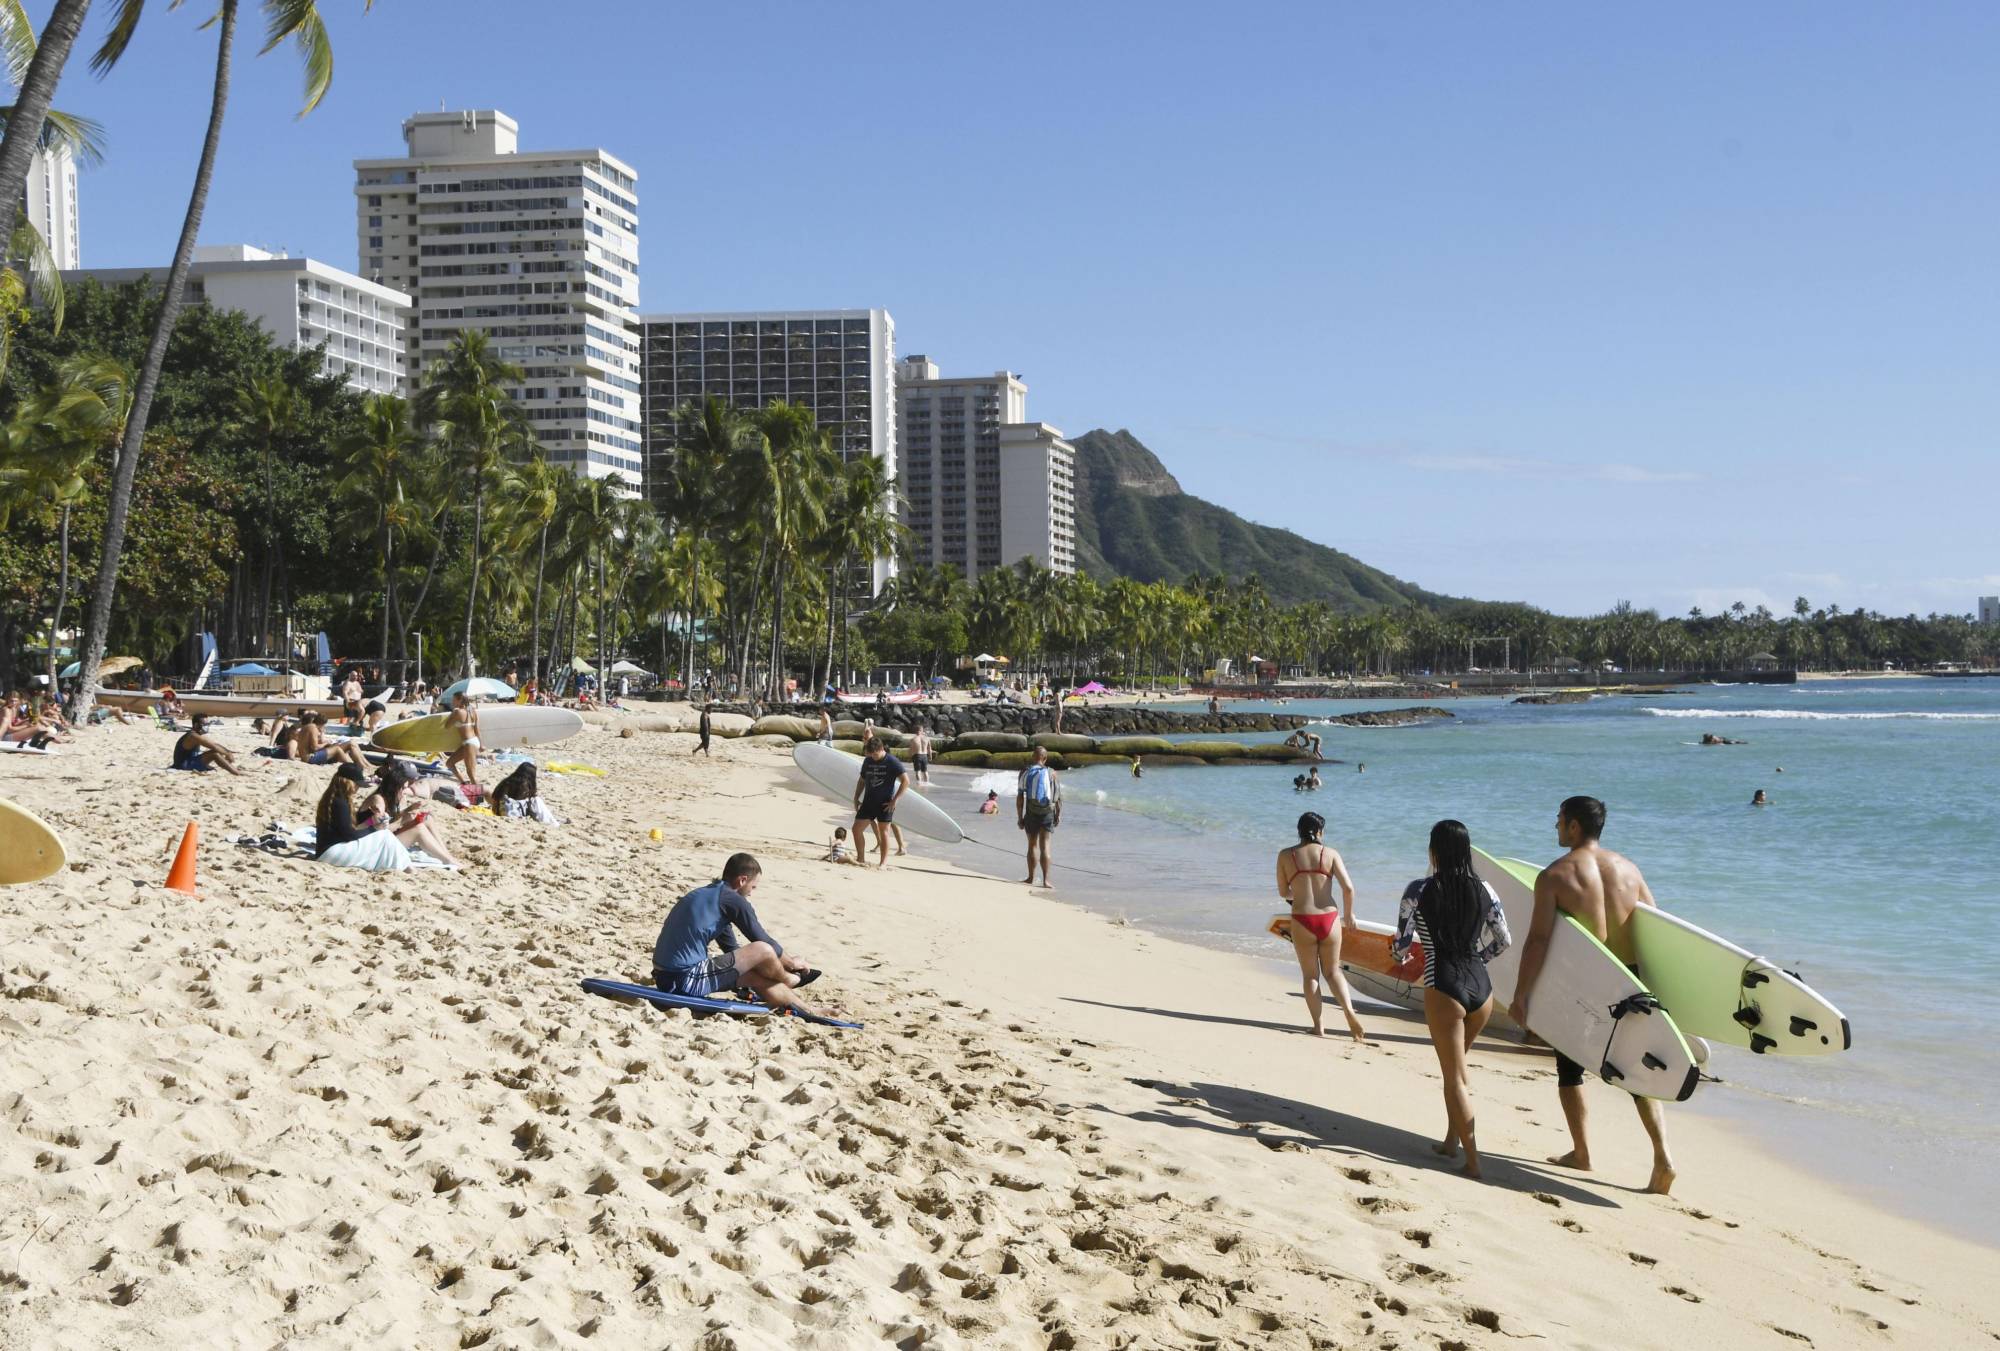 Travel agency HIS Co. plans to resume package tours to Hawaii starting in May for the first time in more than two years. | KYODO